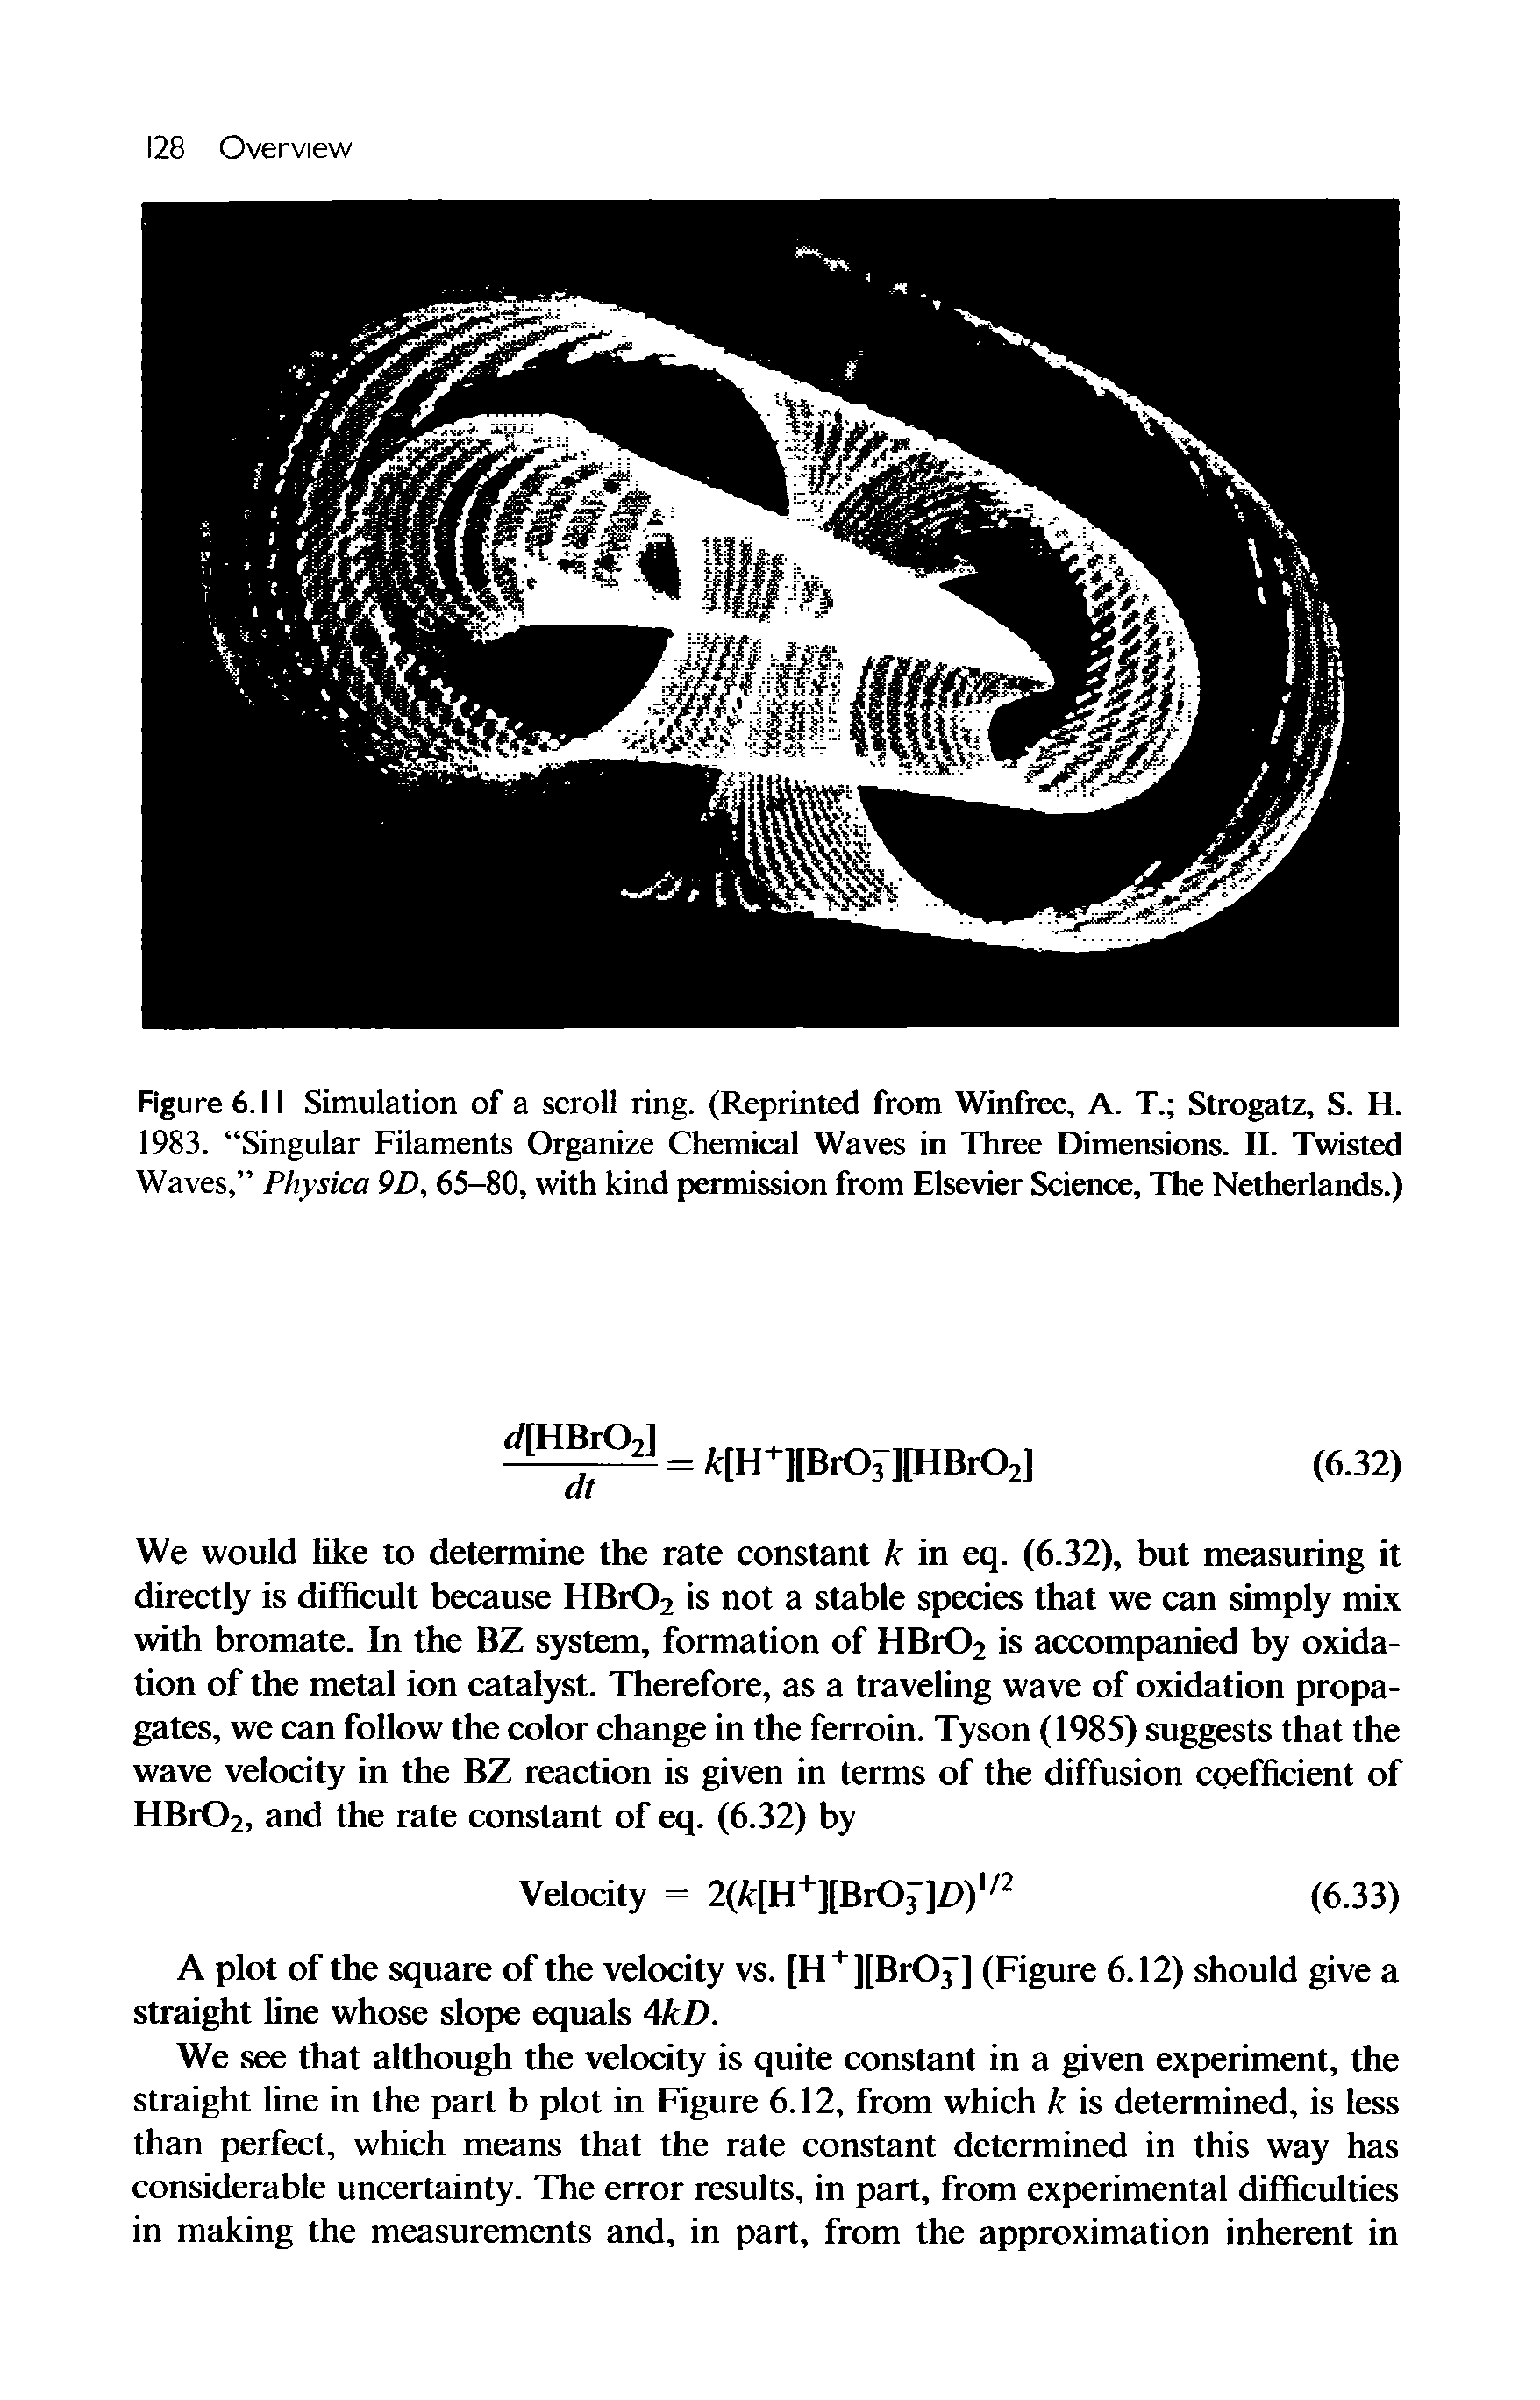 Figure 6.11 Simulation of a scroll ring. (Reprinted from Winfree, A. T. Strogatz, S. H. 1983. Singular Filaments Organize Chemical Waves in Three Dimensions. II. Twisted Waves, Physica 9D, 65-80, with kind permission from Elsevier Science, The Netherlands.)...